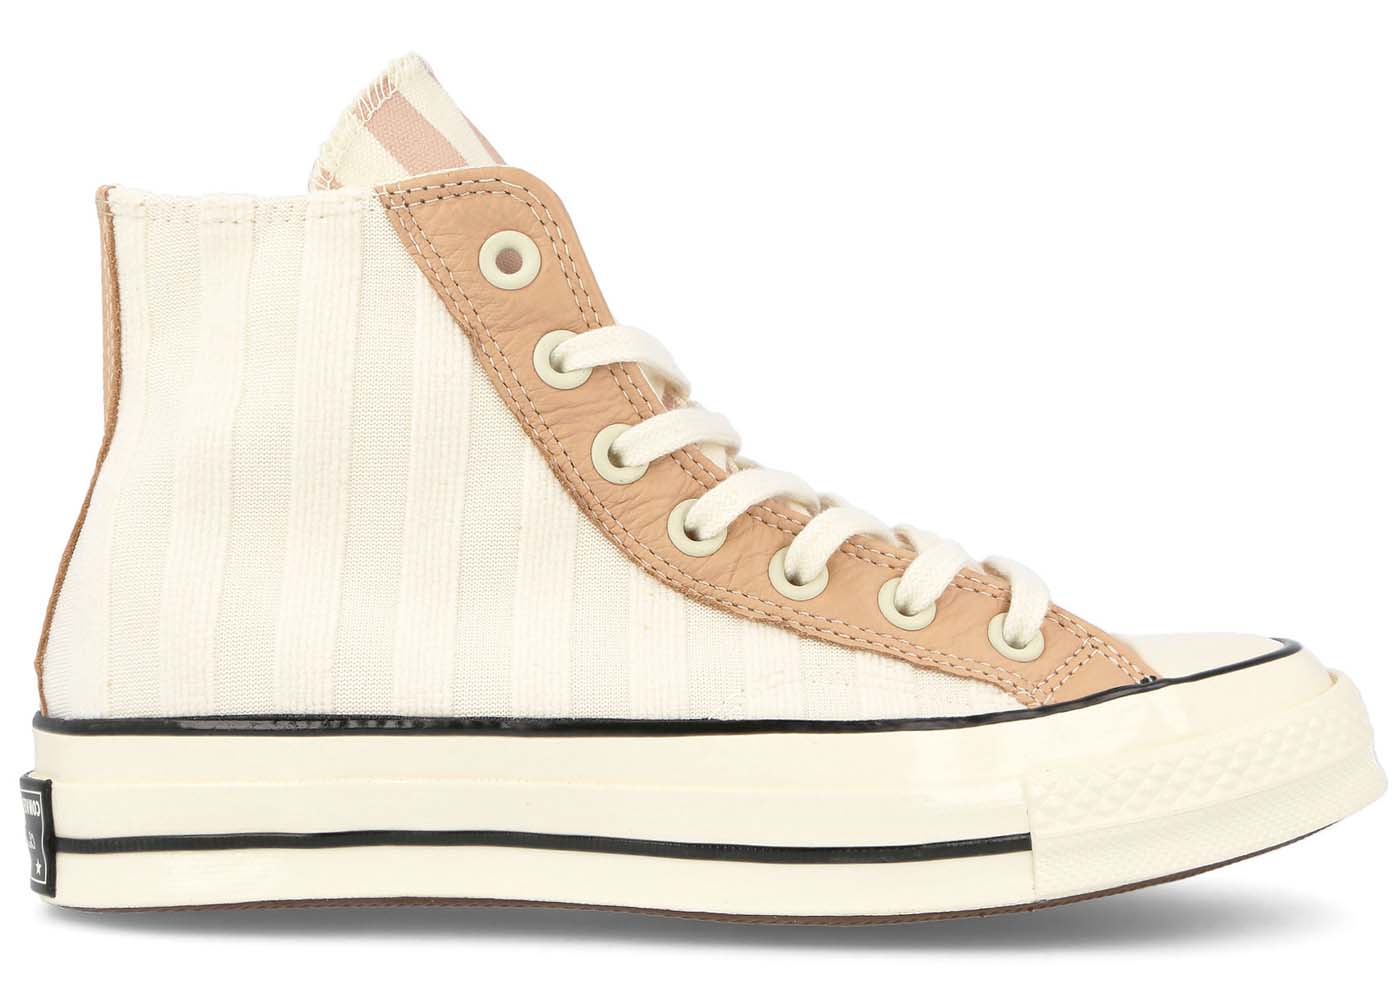 Converse Chuck Taylor All Star 70 Hi Striped Terry Cloth Egret Pink Clay (Women's)